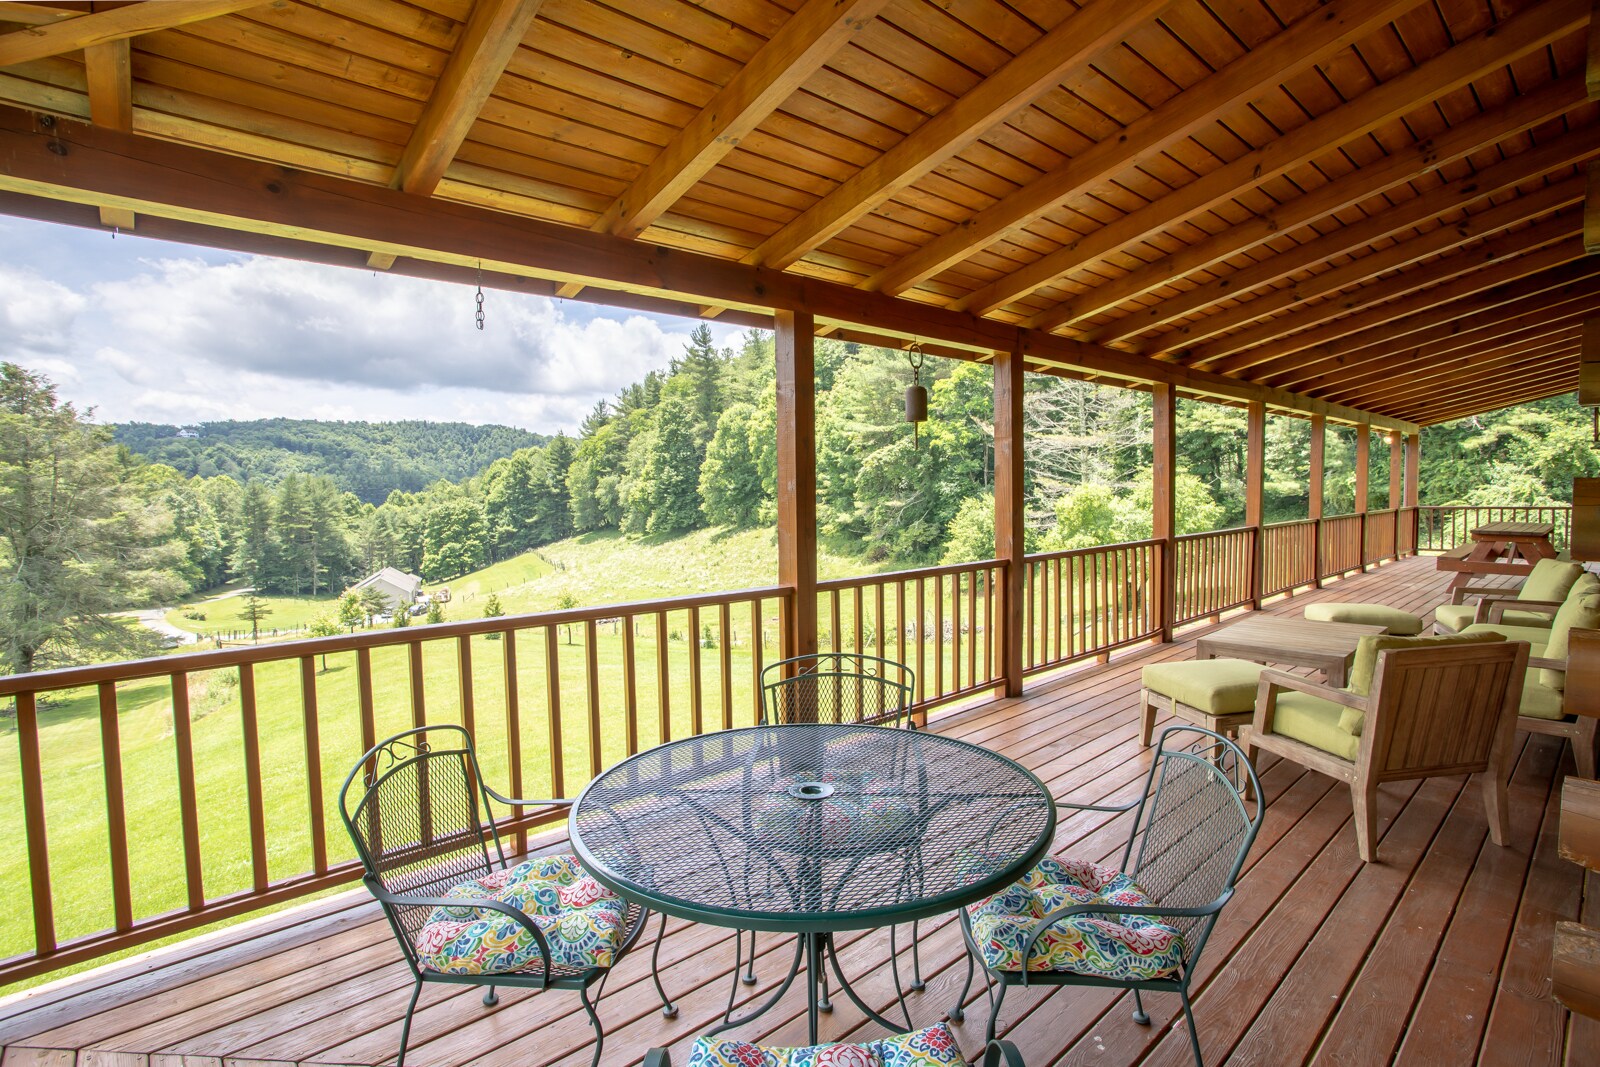 Wow! Mountain and Valley Views from Outdoor Living and Dining Areas on the Massive Covered Deck at Sleepy Valley Hideaway!